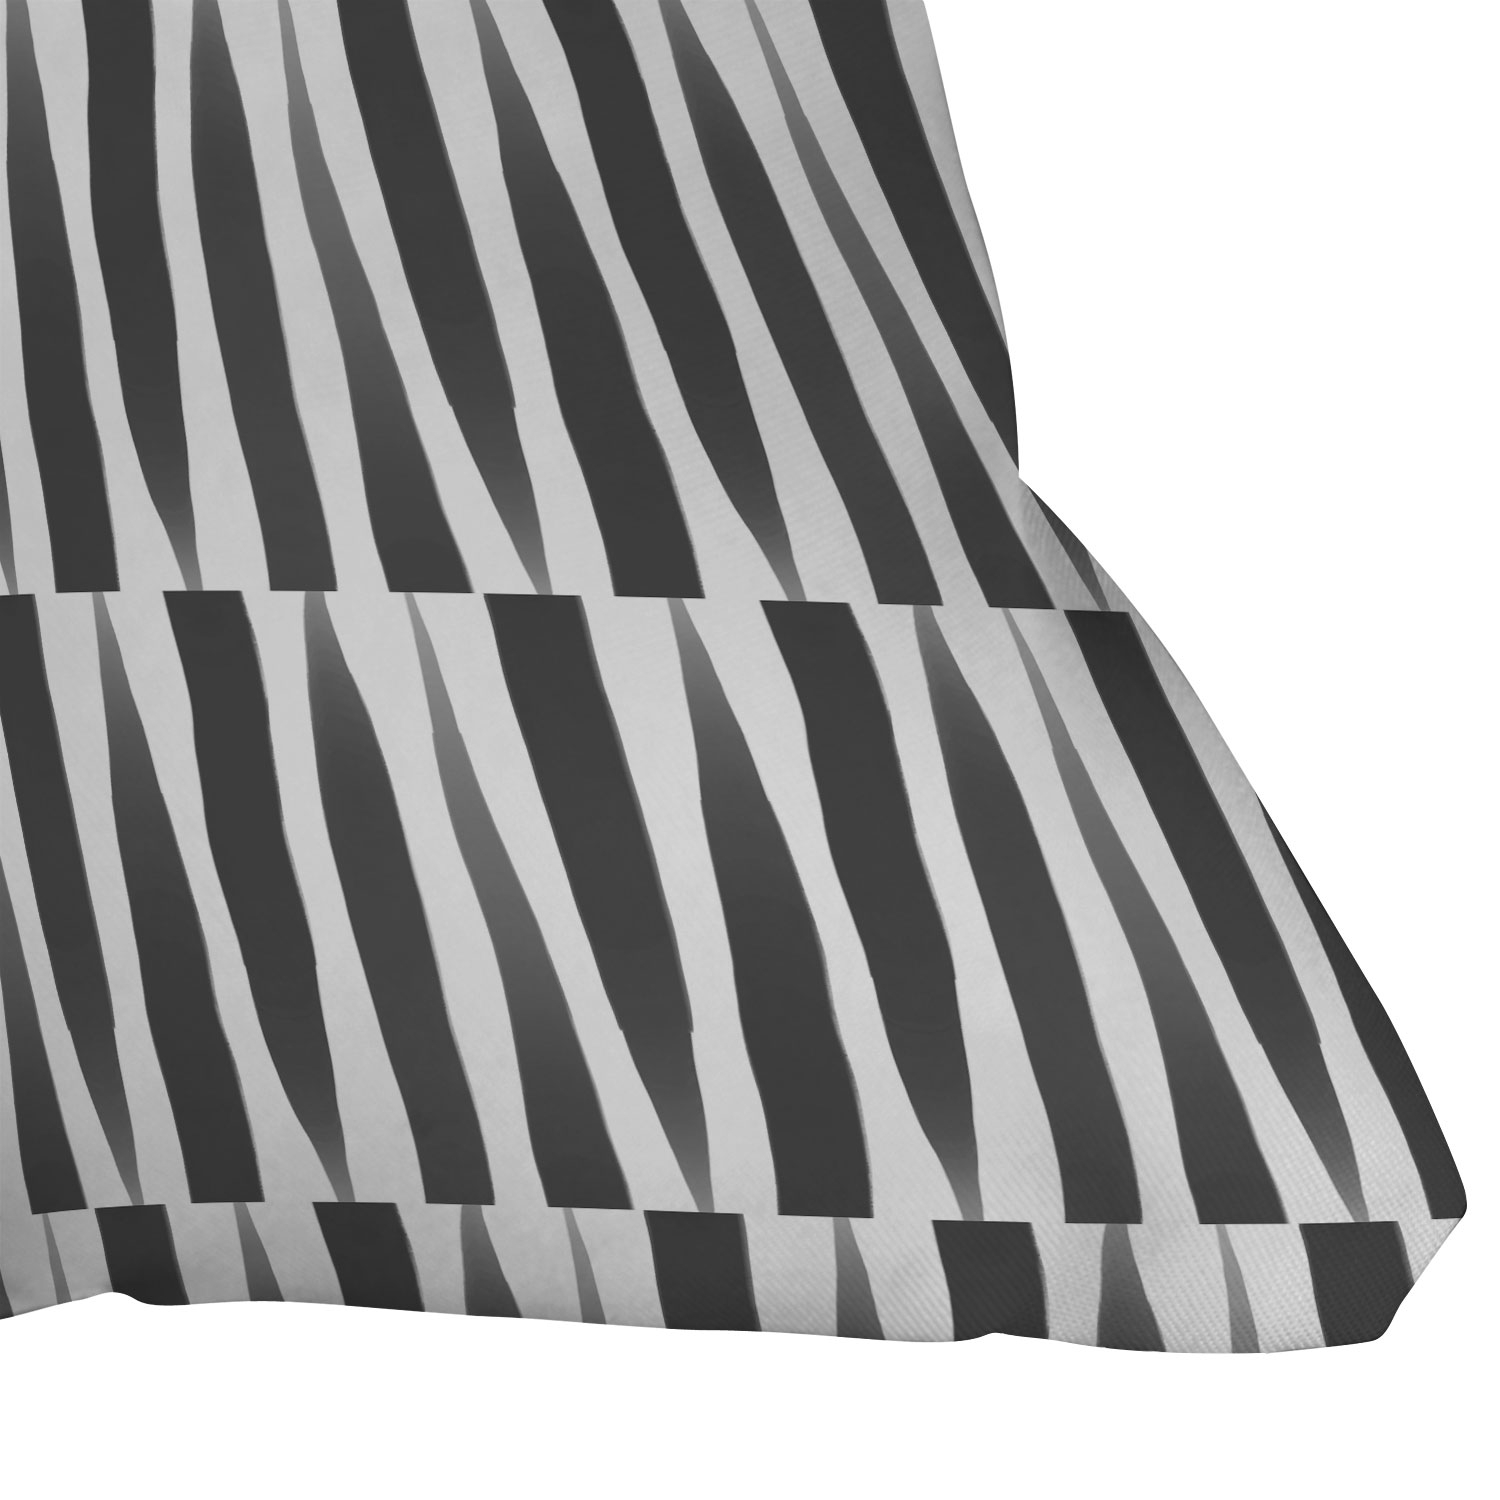 Bw Abstract Theme by Emanuela Carratoni - Outdoor Throw Pillow 18" x 18" - Image 3